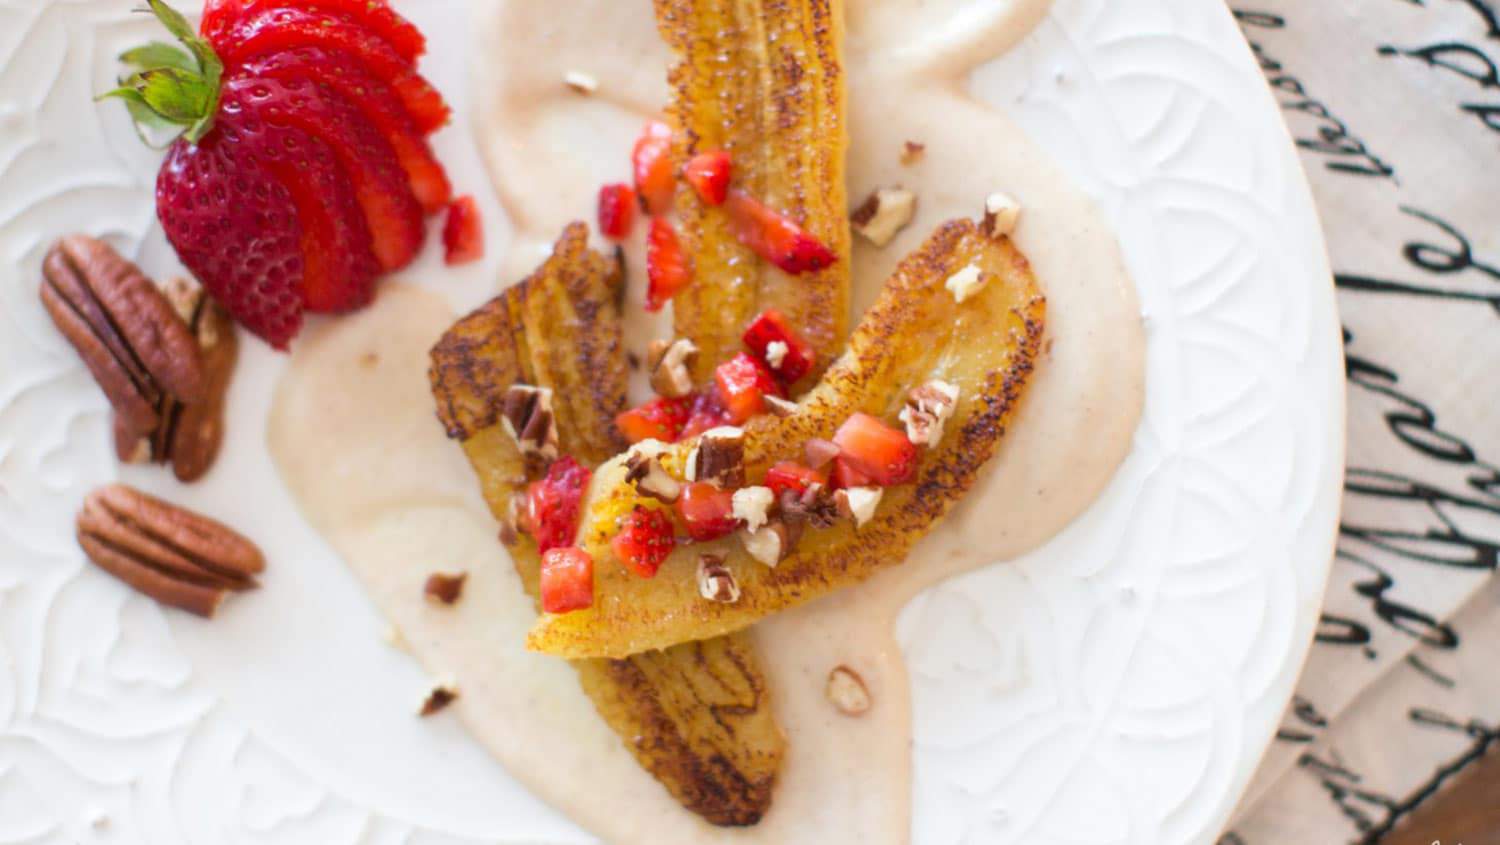 caramelized bananas with vegan cream sauce on a plate with sliced strawberries and pecans